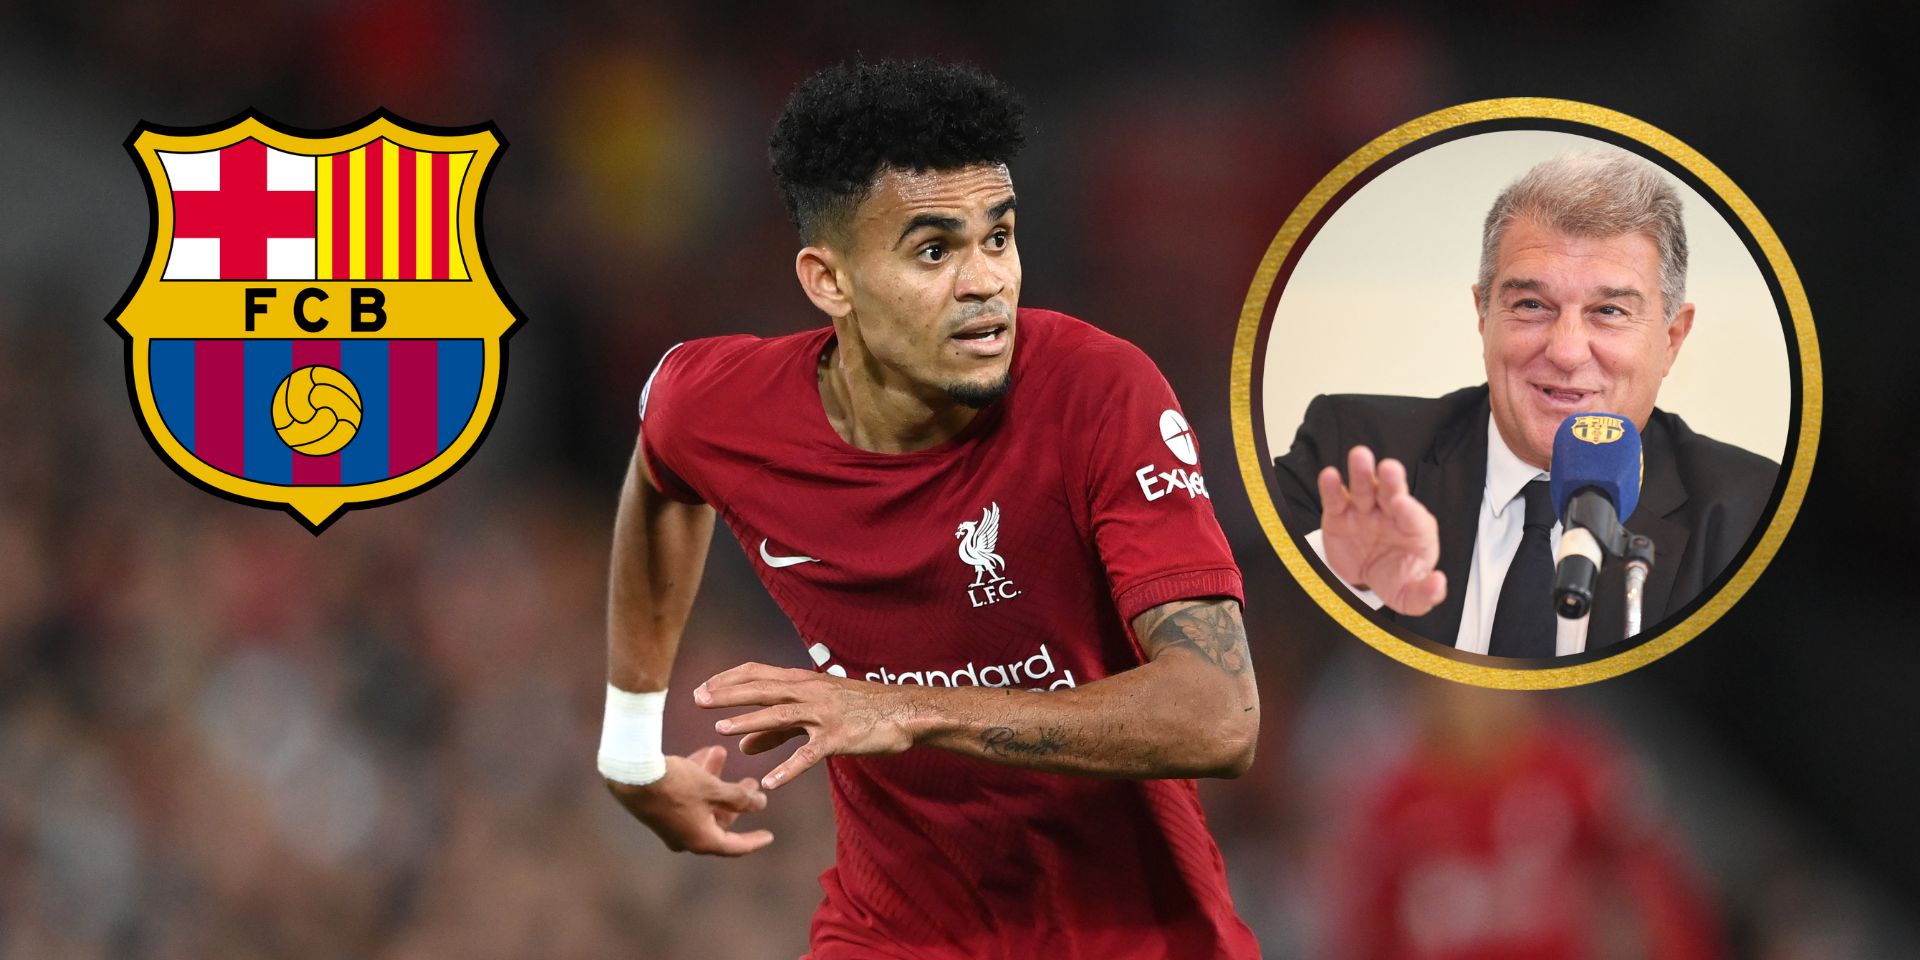 Barcelona claim that ‘Liverpool got ahead of us’ by signing 25-year-old in current squad